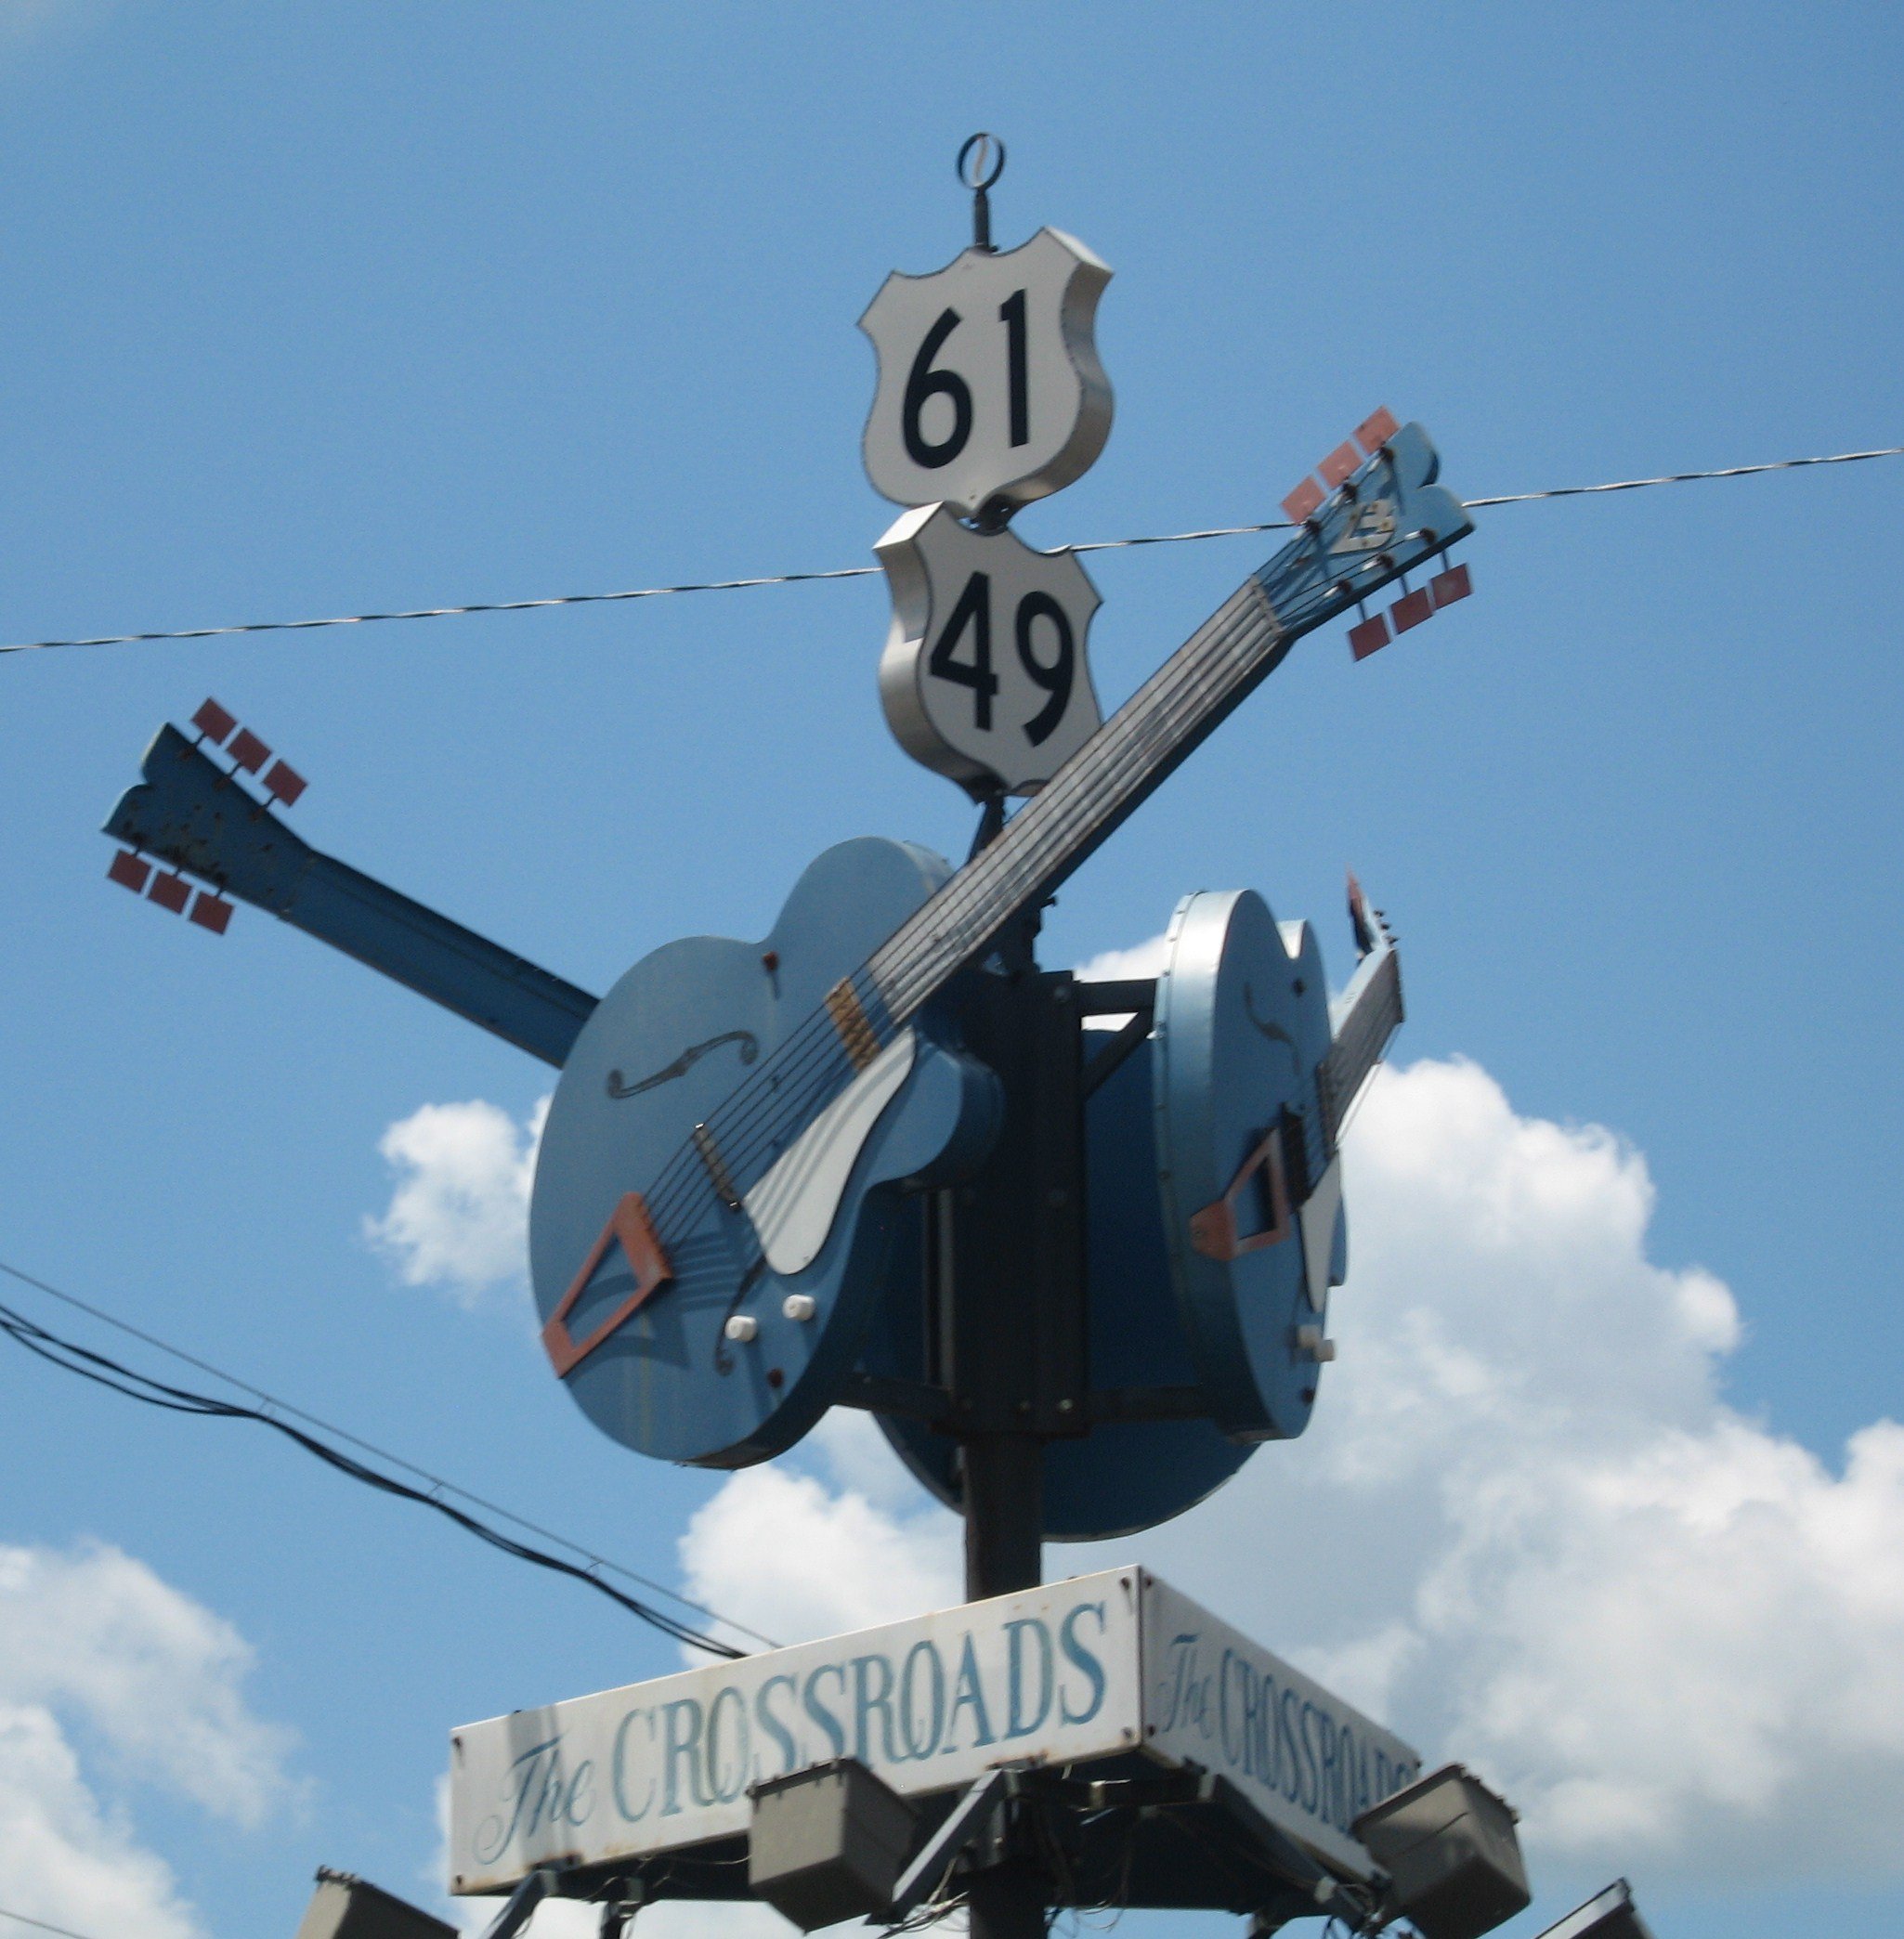 "The Crossroads", where Robert Johnson supposedly sold his soul to the Devil at Clarksdale, Mississippi | Photo: Joe Mazzola, ClarksdaleMS Crossroads, CC BY-SA 2.0